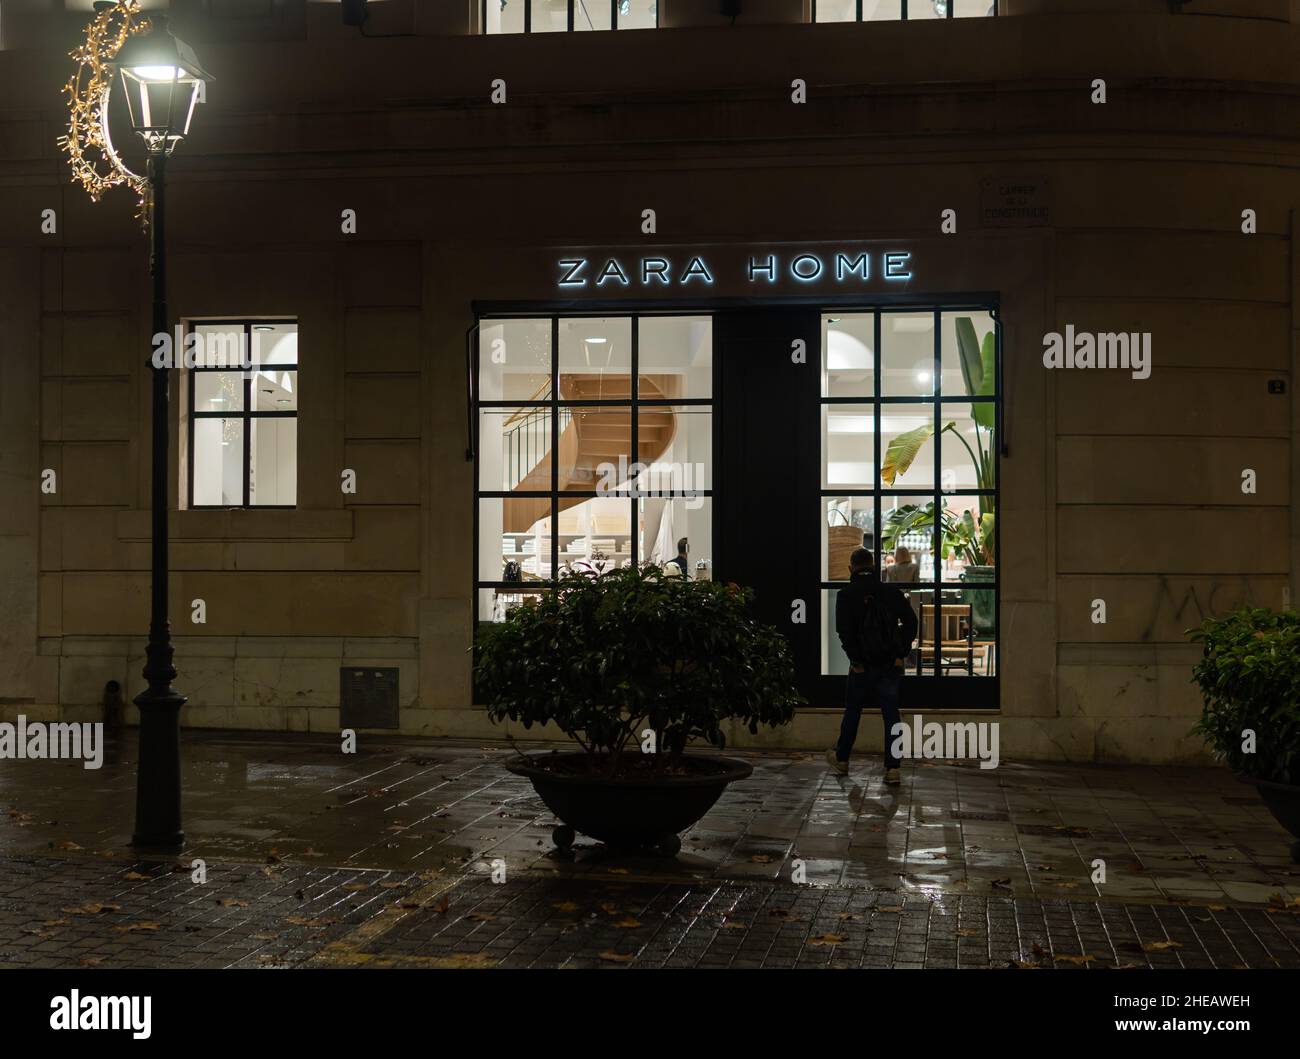 Zara Home Shop Business High Resolution Stock Photography and Images - Alamy